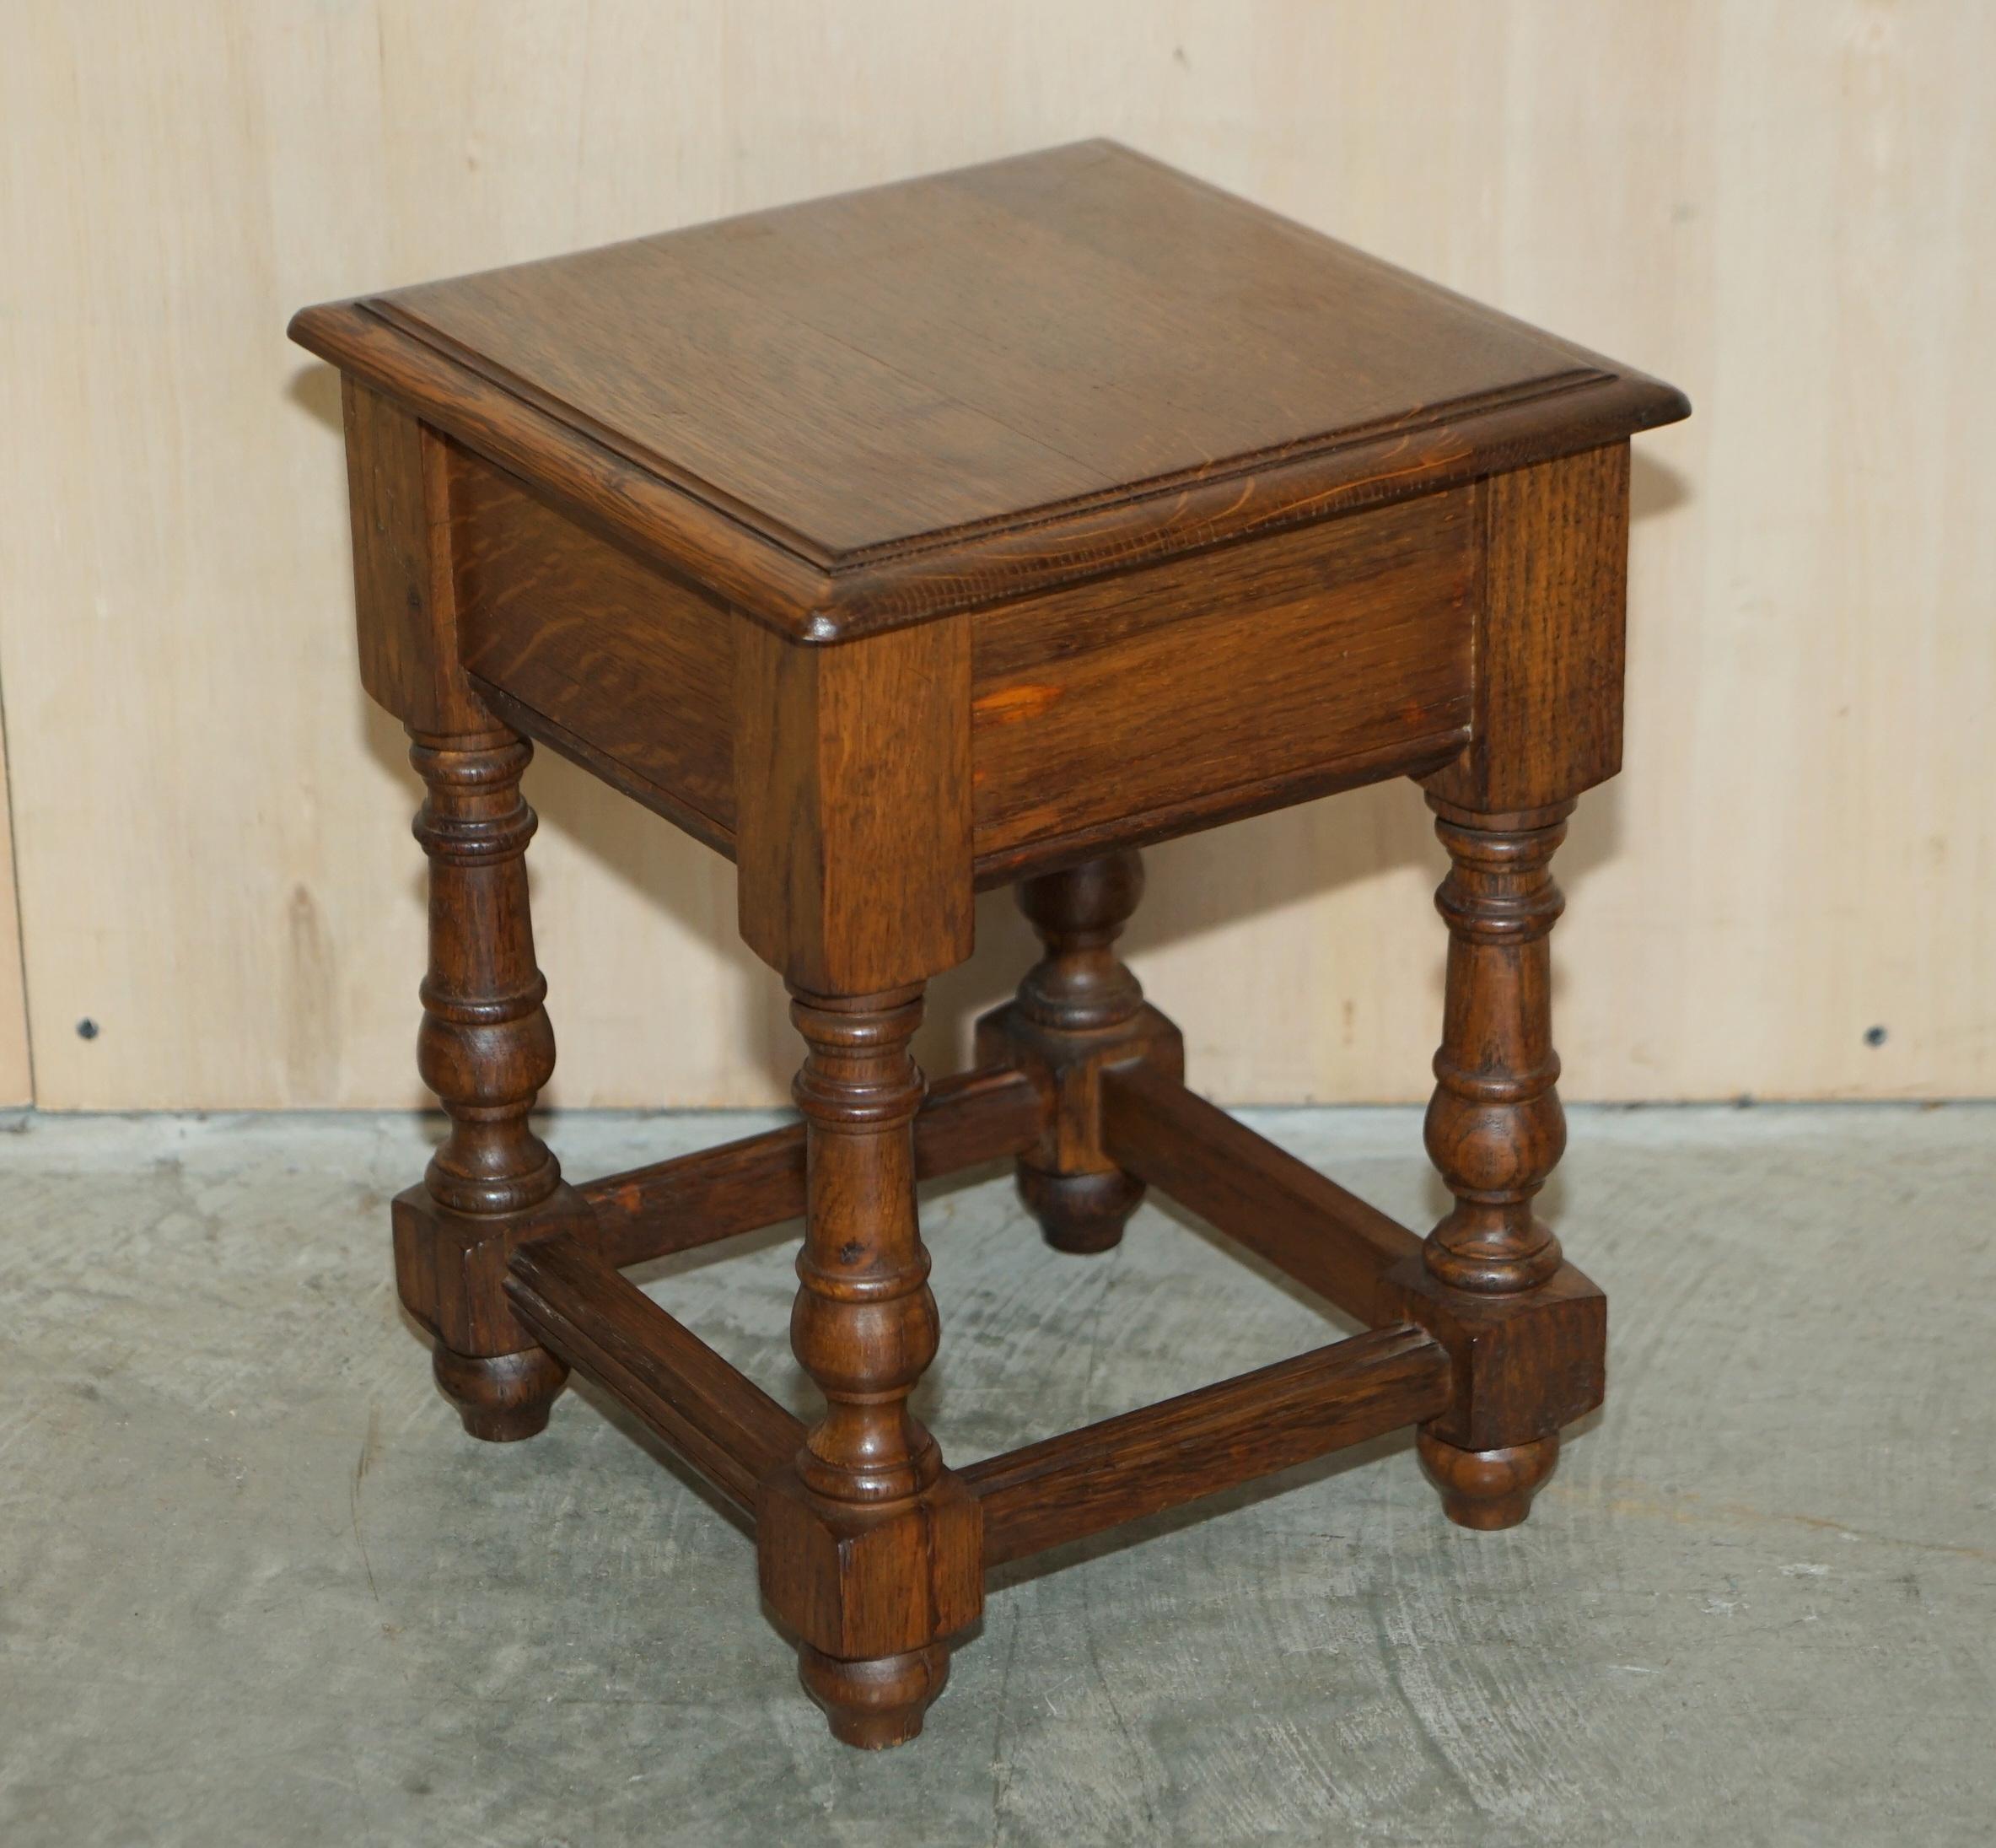 We are delighted to offer for sale this lovely pair of late Victorian to early Edwardian oak side tables.

A good looking well made and decorative pair, these can be used as side tables or stools, they are hand made in oak using traditional